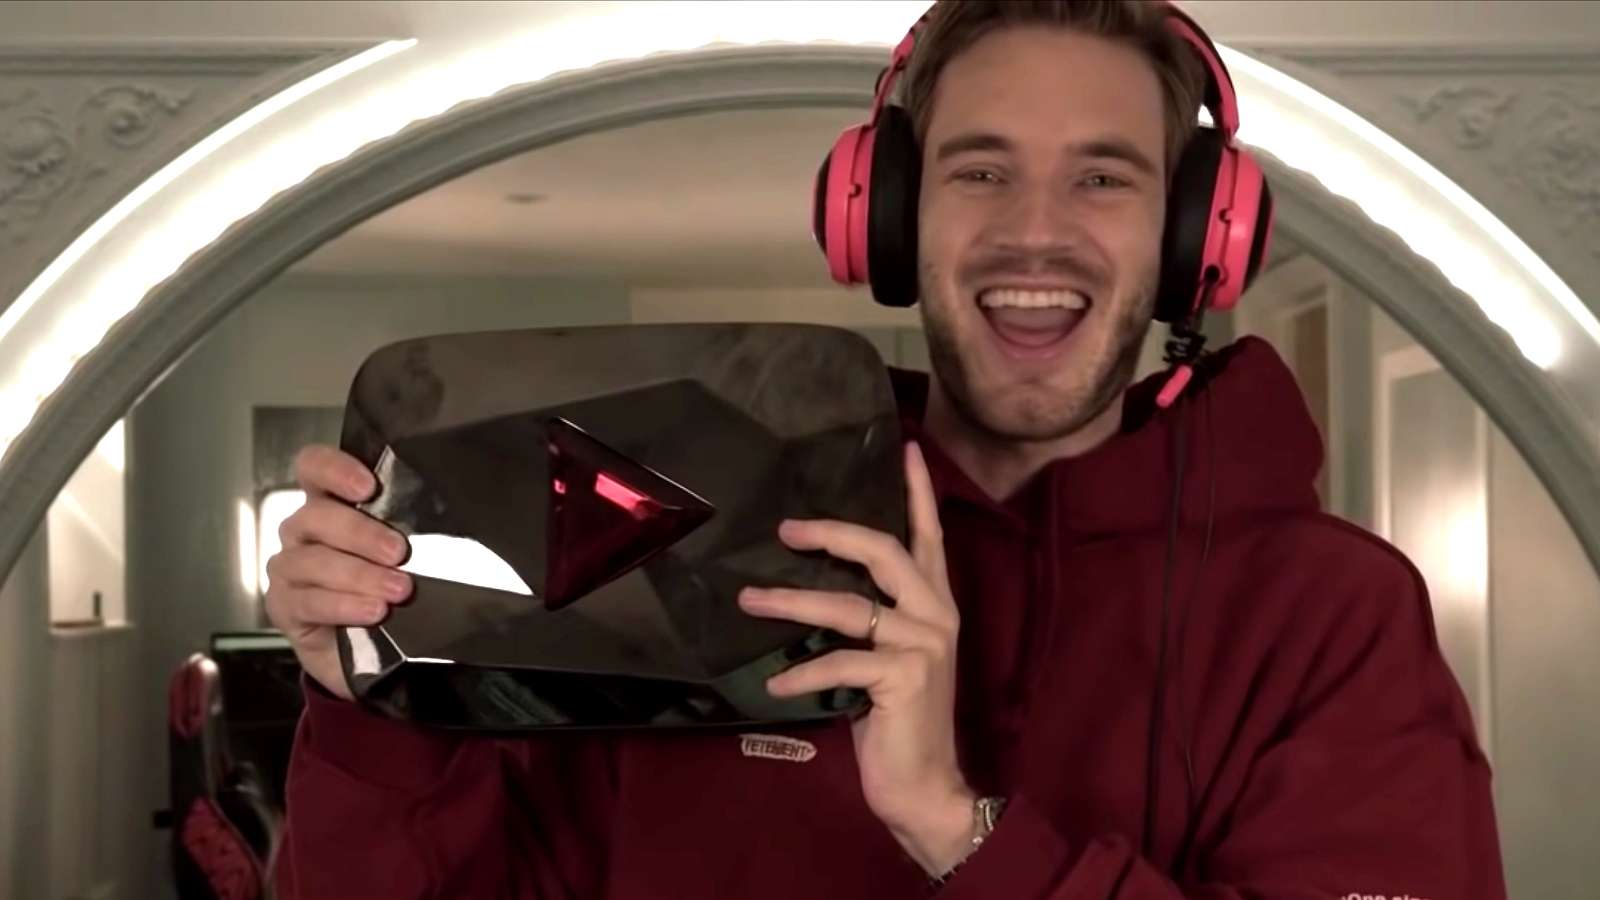 PewDiePie holding his 100 million subsrcibers reward in red hoody with headphones on